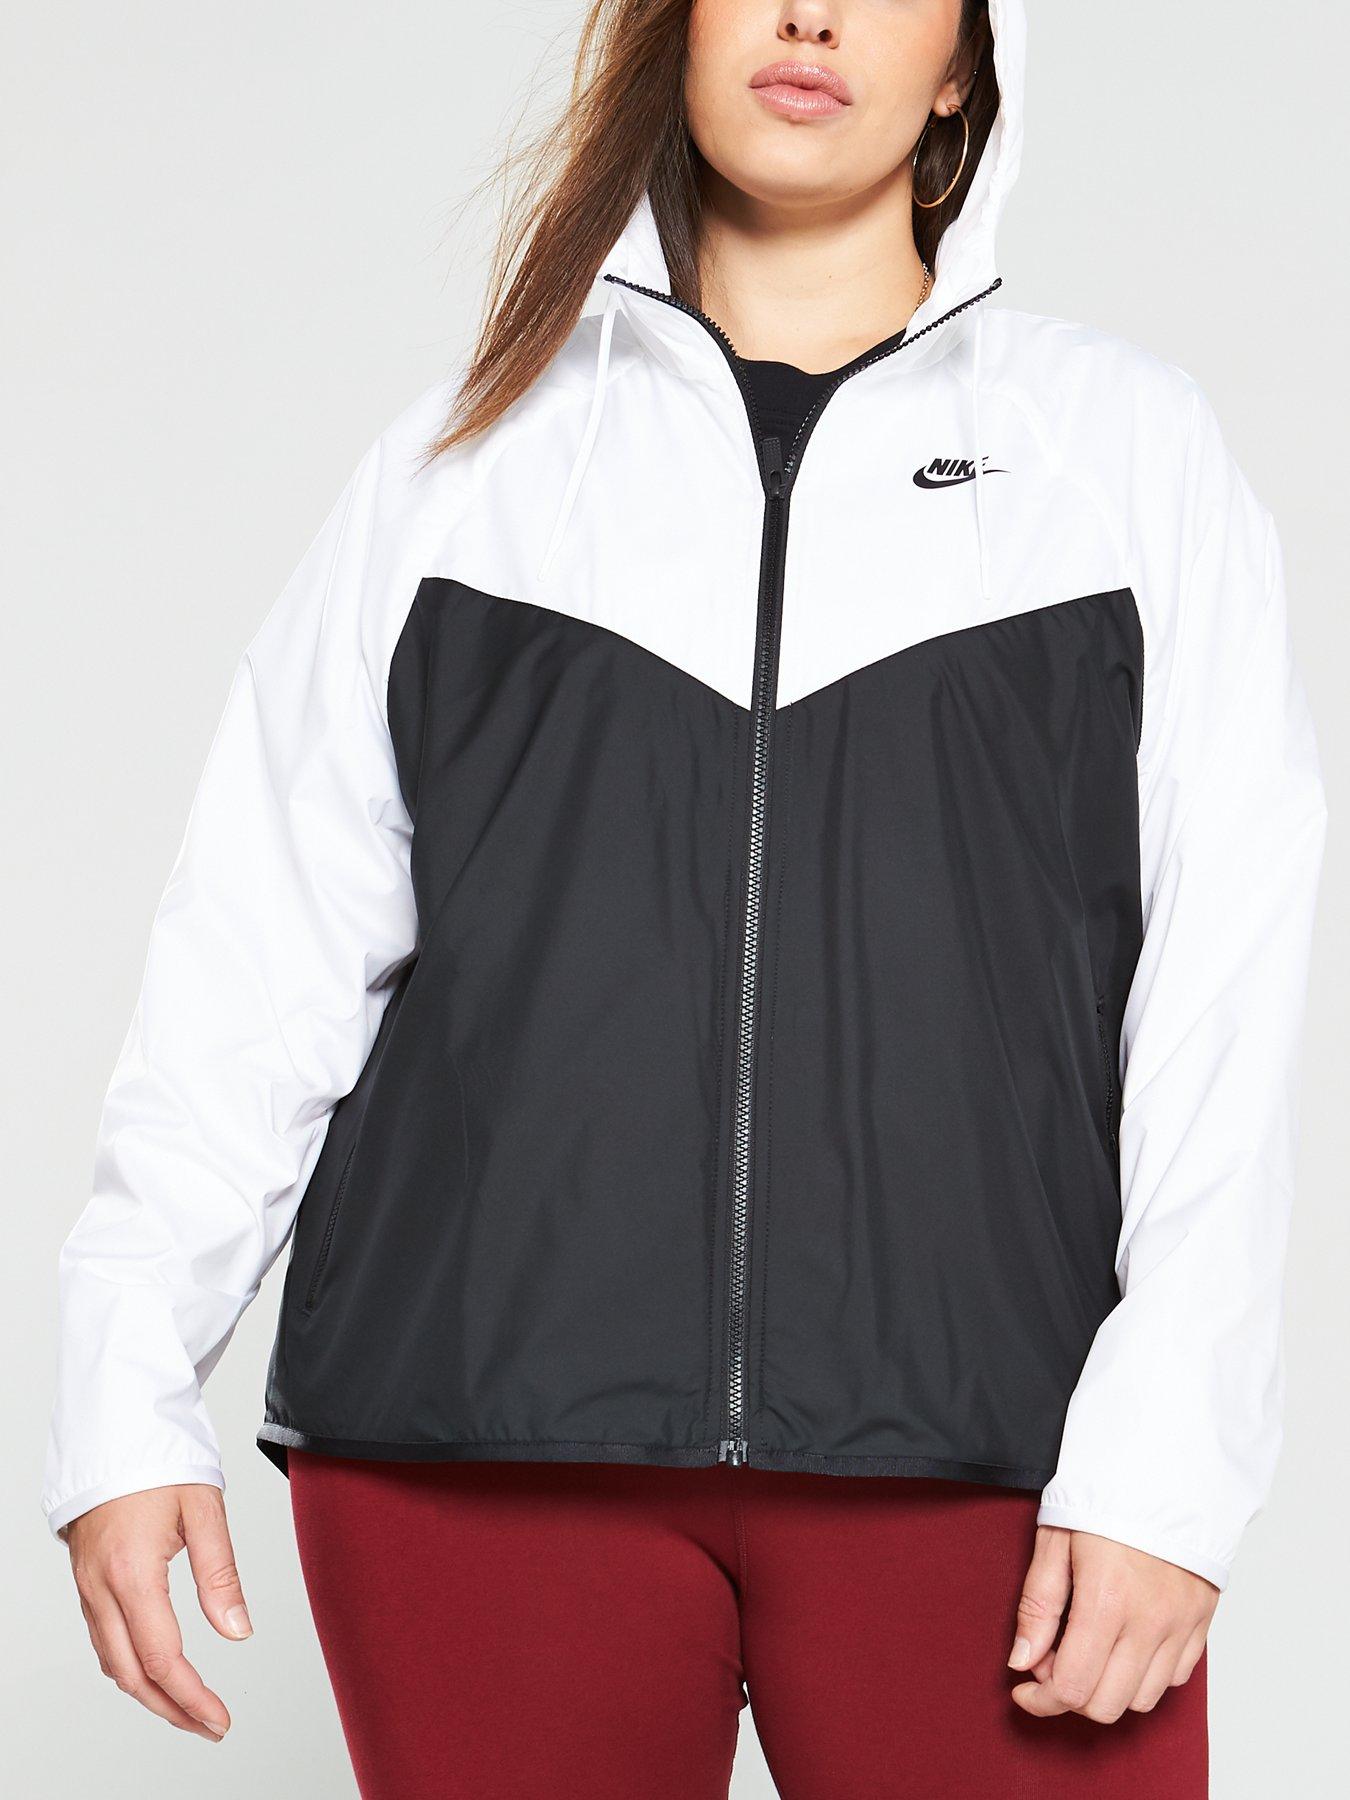 tight fitted nike jackets